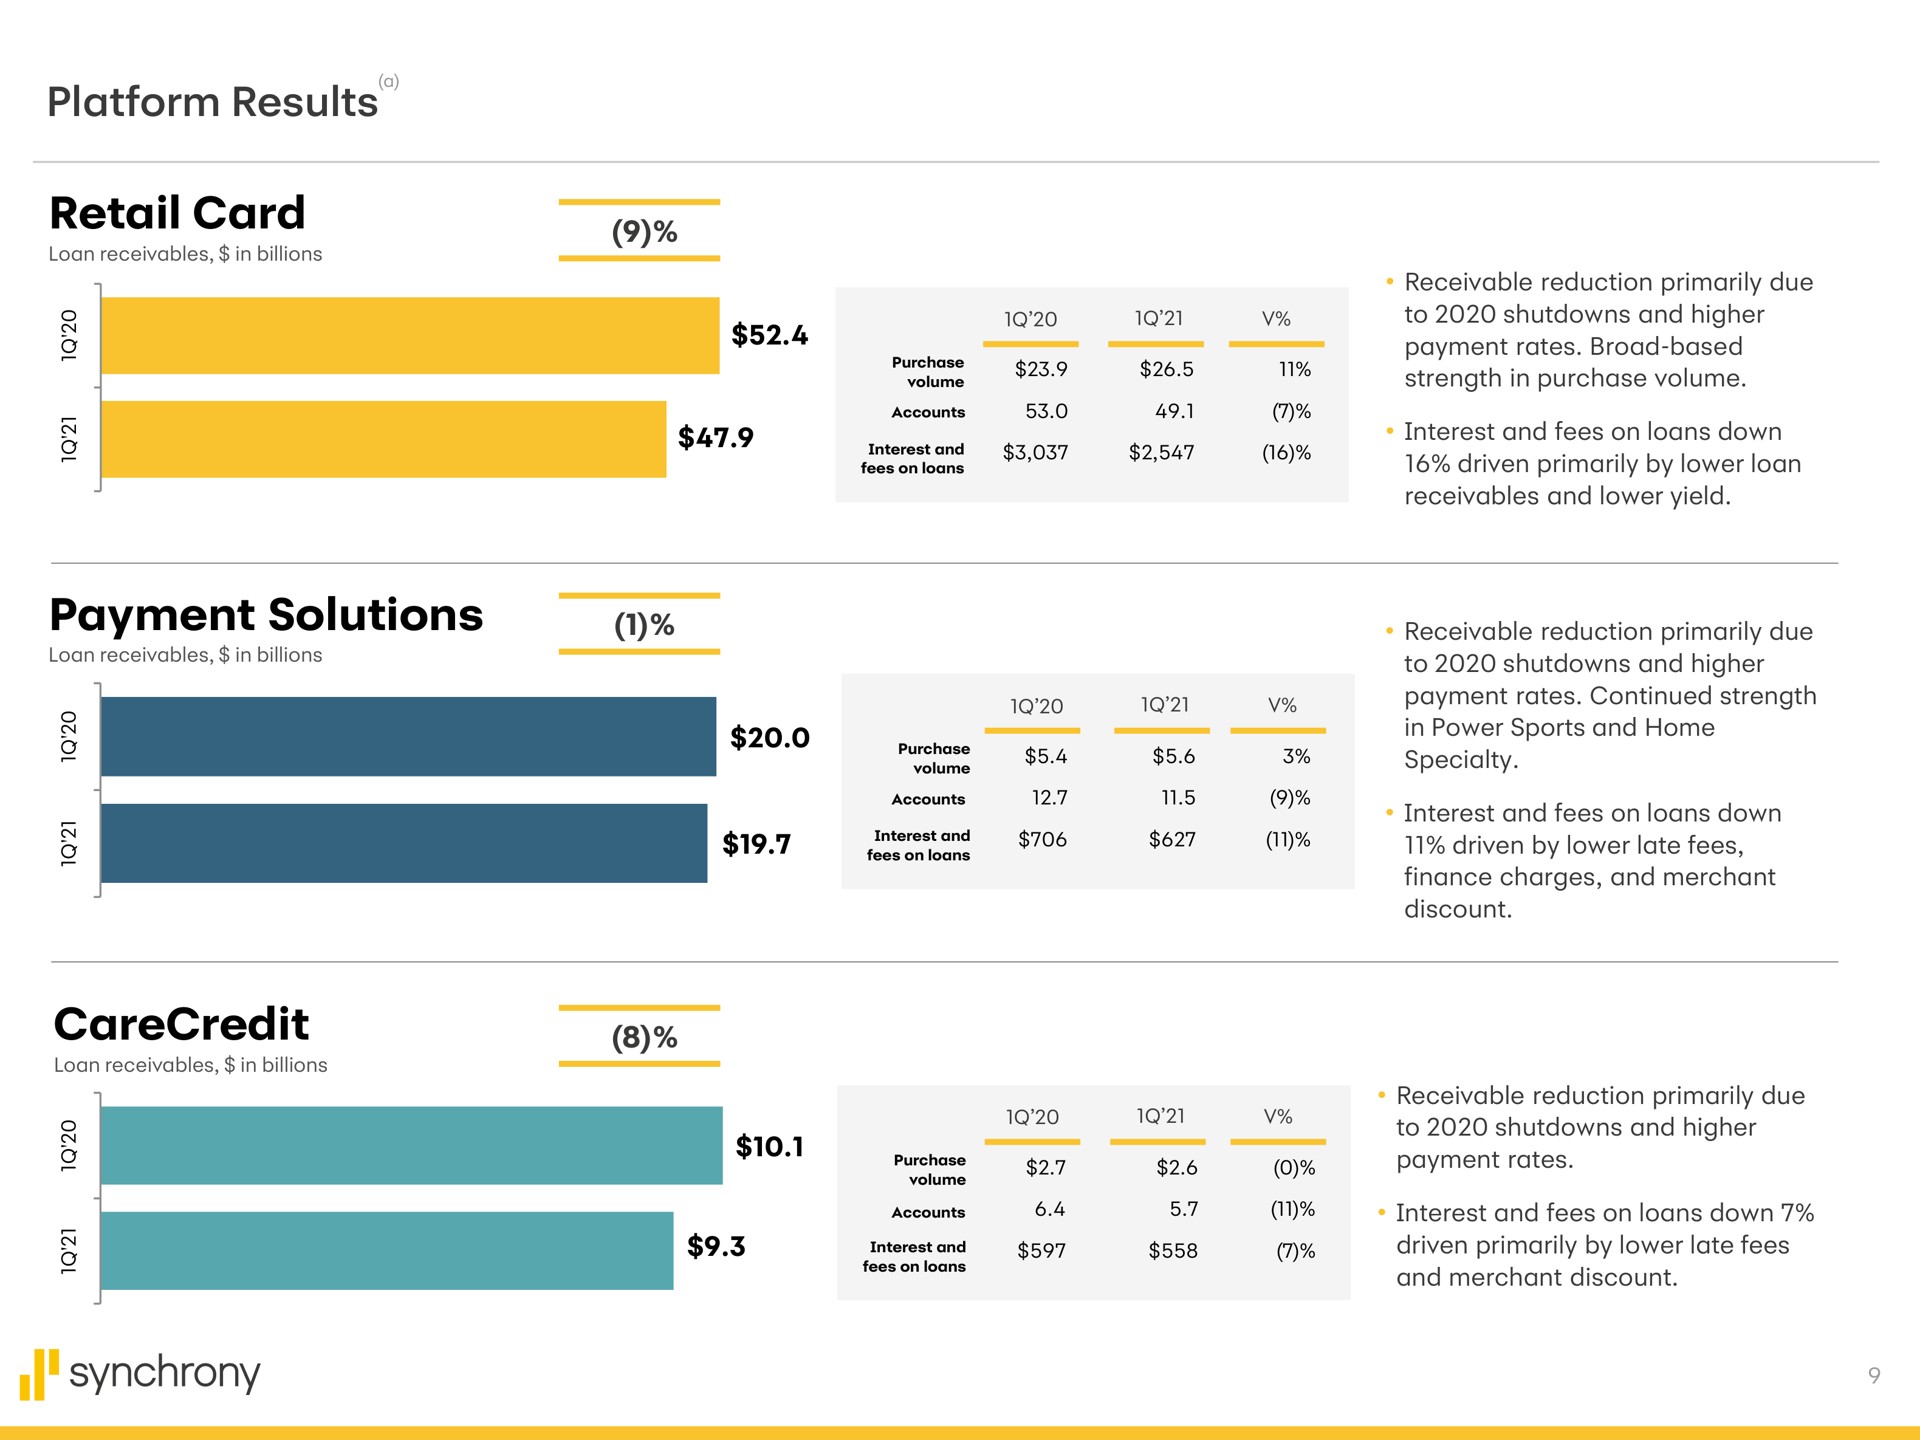 platform results retail card payment solutions puck synchrony | Synchrony Financial